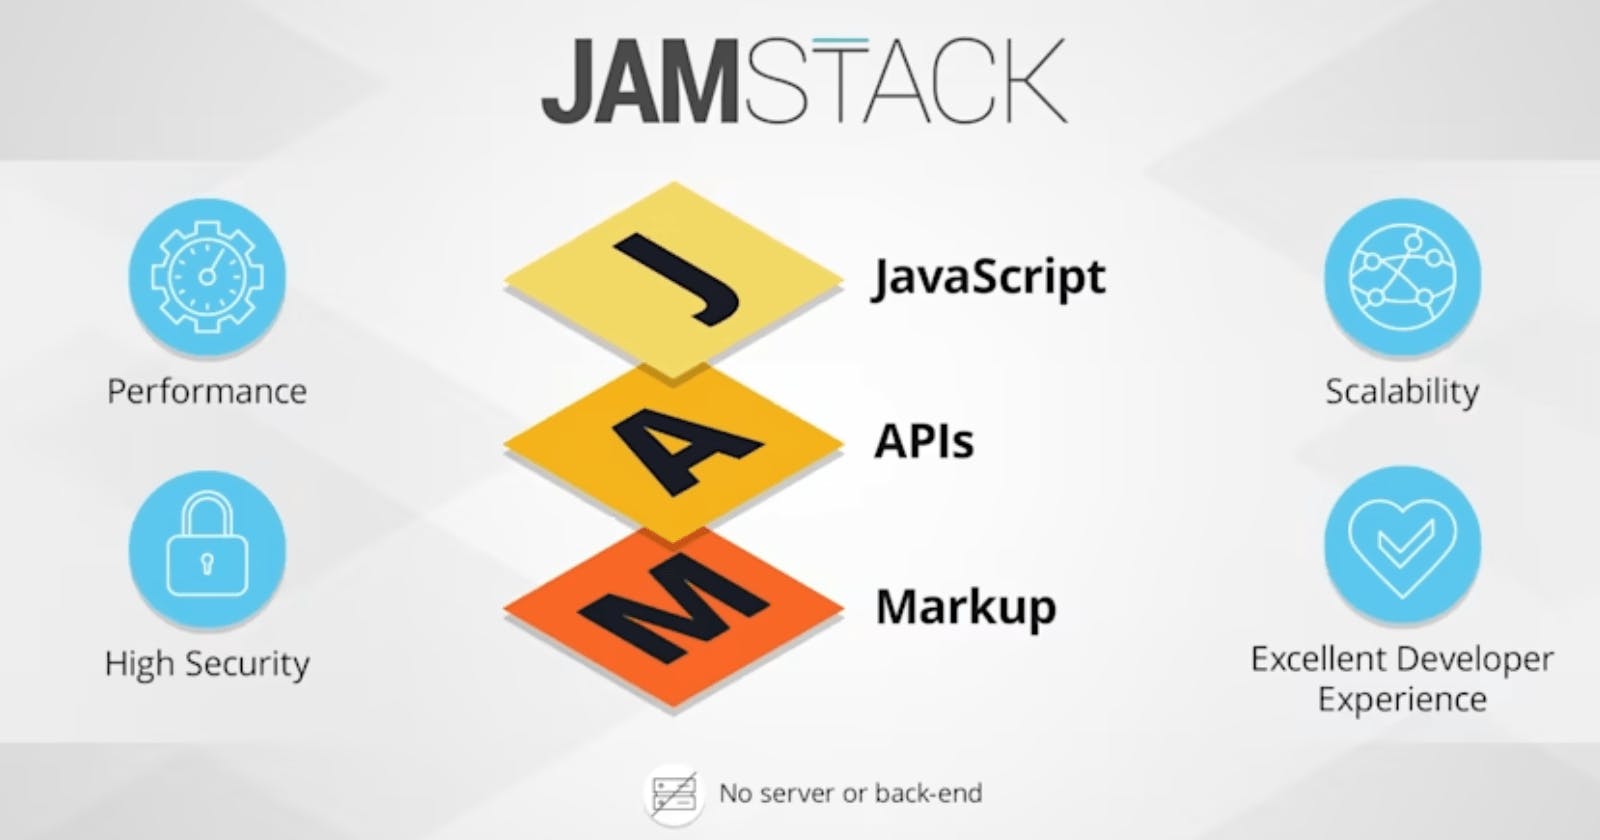 Why the JamStack is the future of Web Development